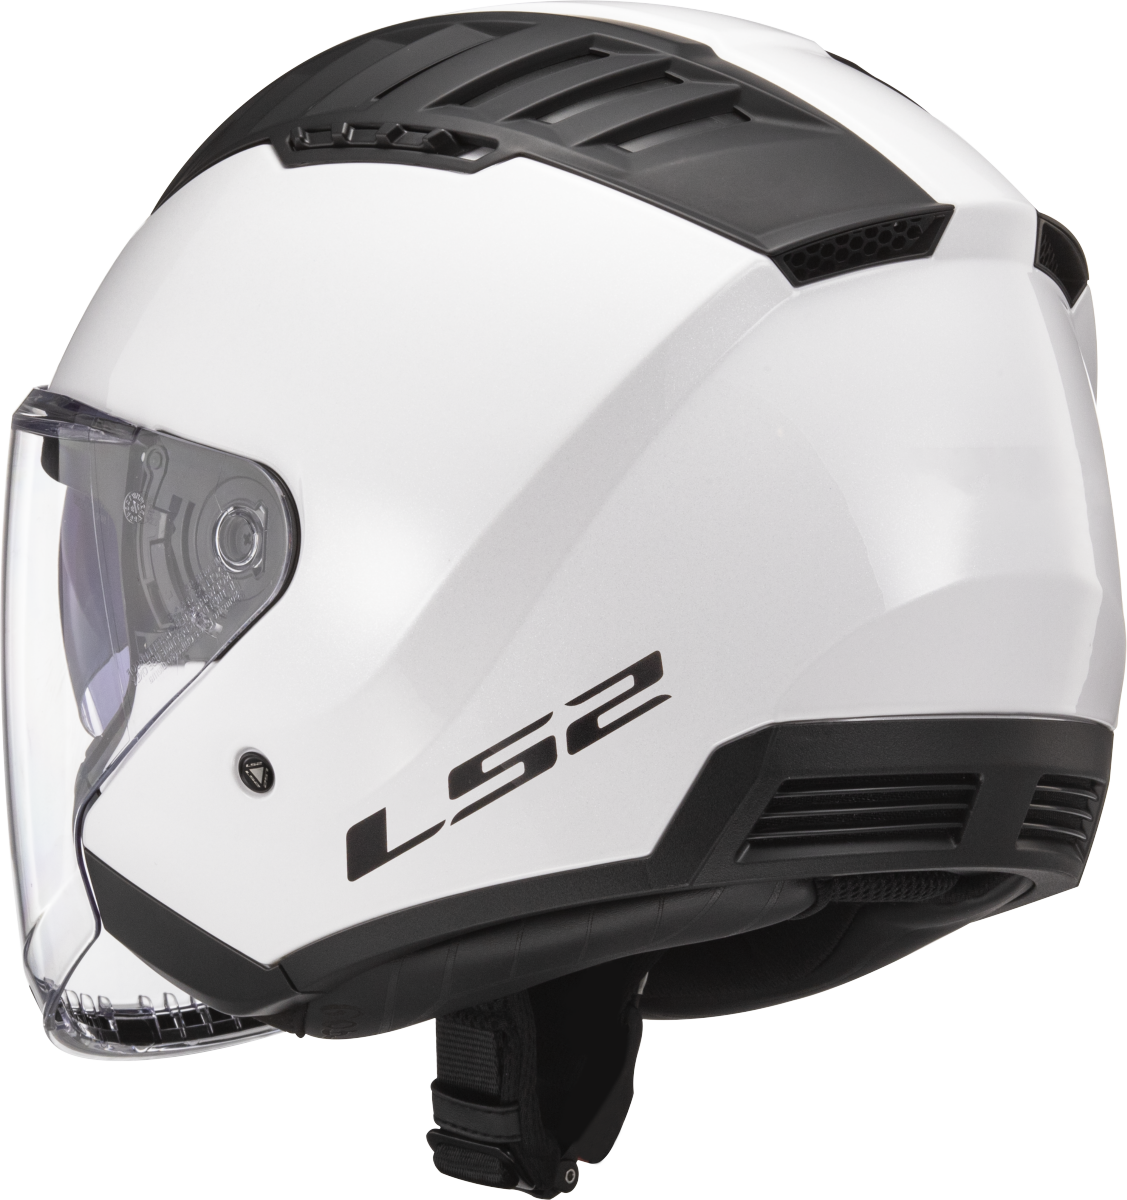 Casco LS2 OF600 COPTER SOLID BLANCO 1